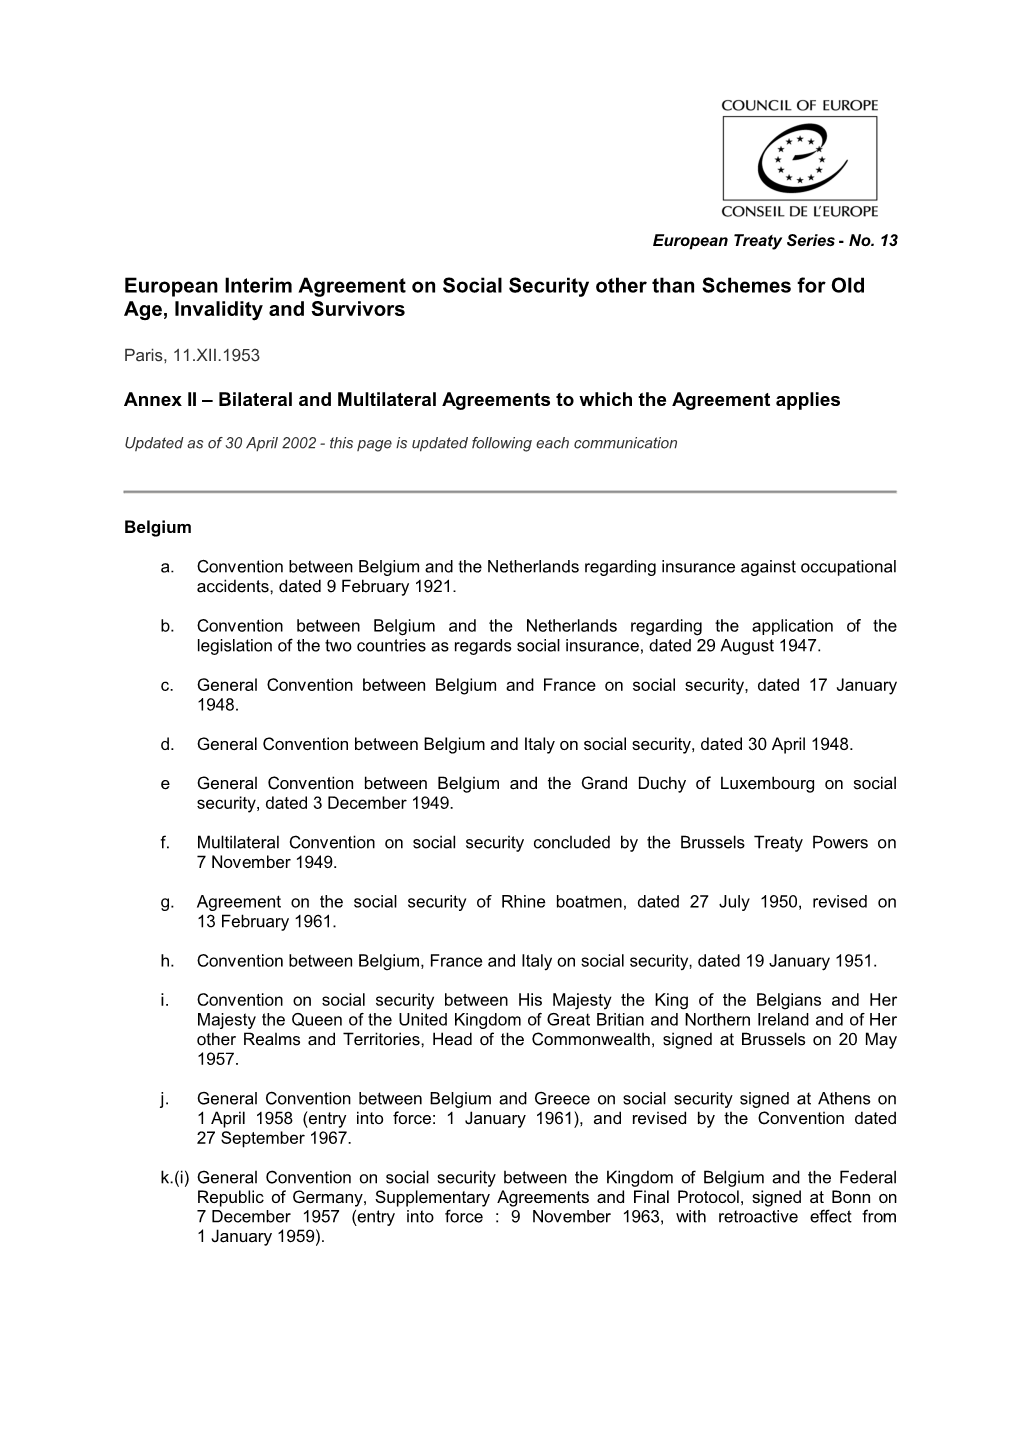 Annex II to the European Interim Agreement on Social Security